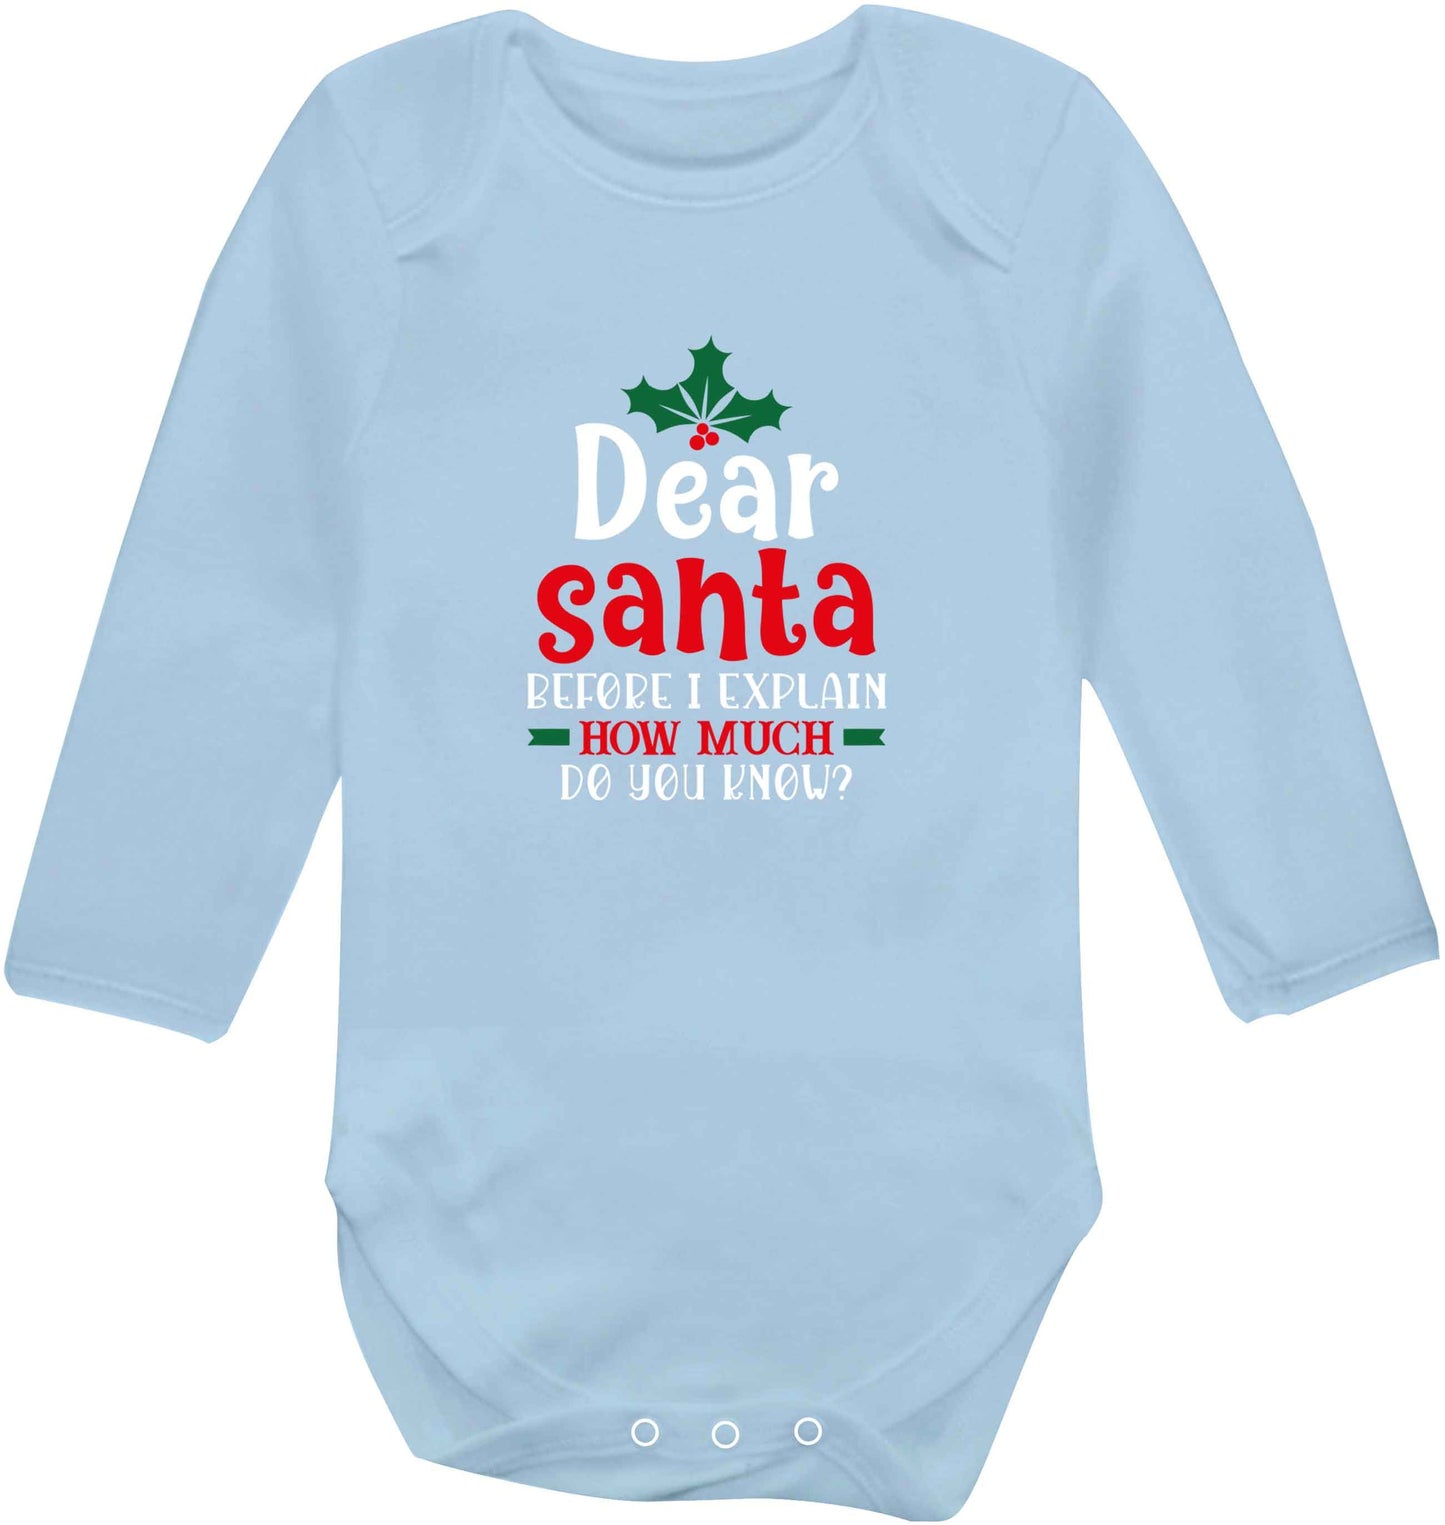 Santa before I explain how much do you know? baby vest long sleeved pale blue 6-12 months